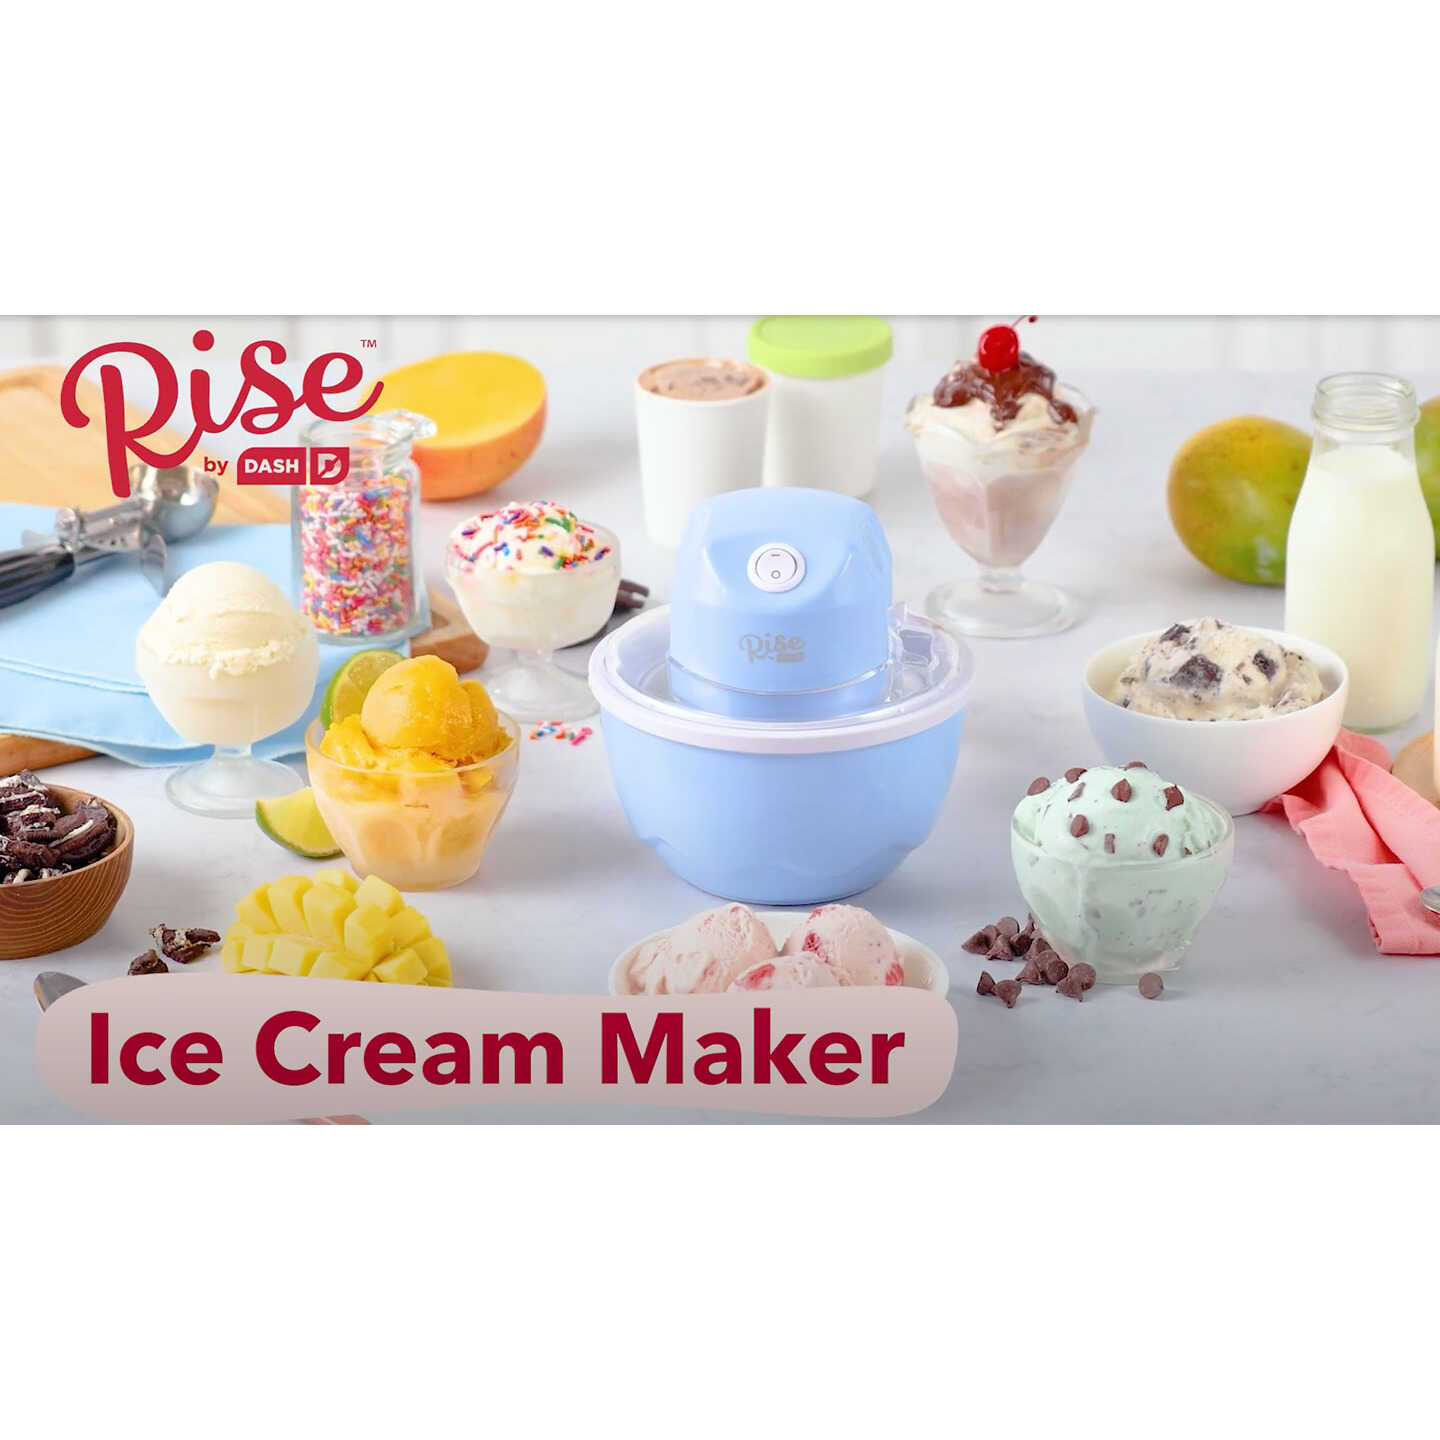 Dash My Pint Ice Cream Maker - used couple times - LIKE NEW